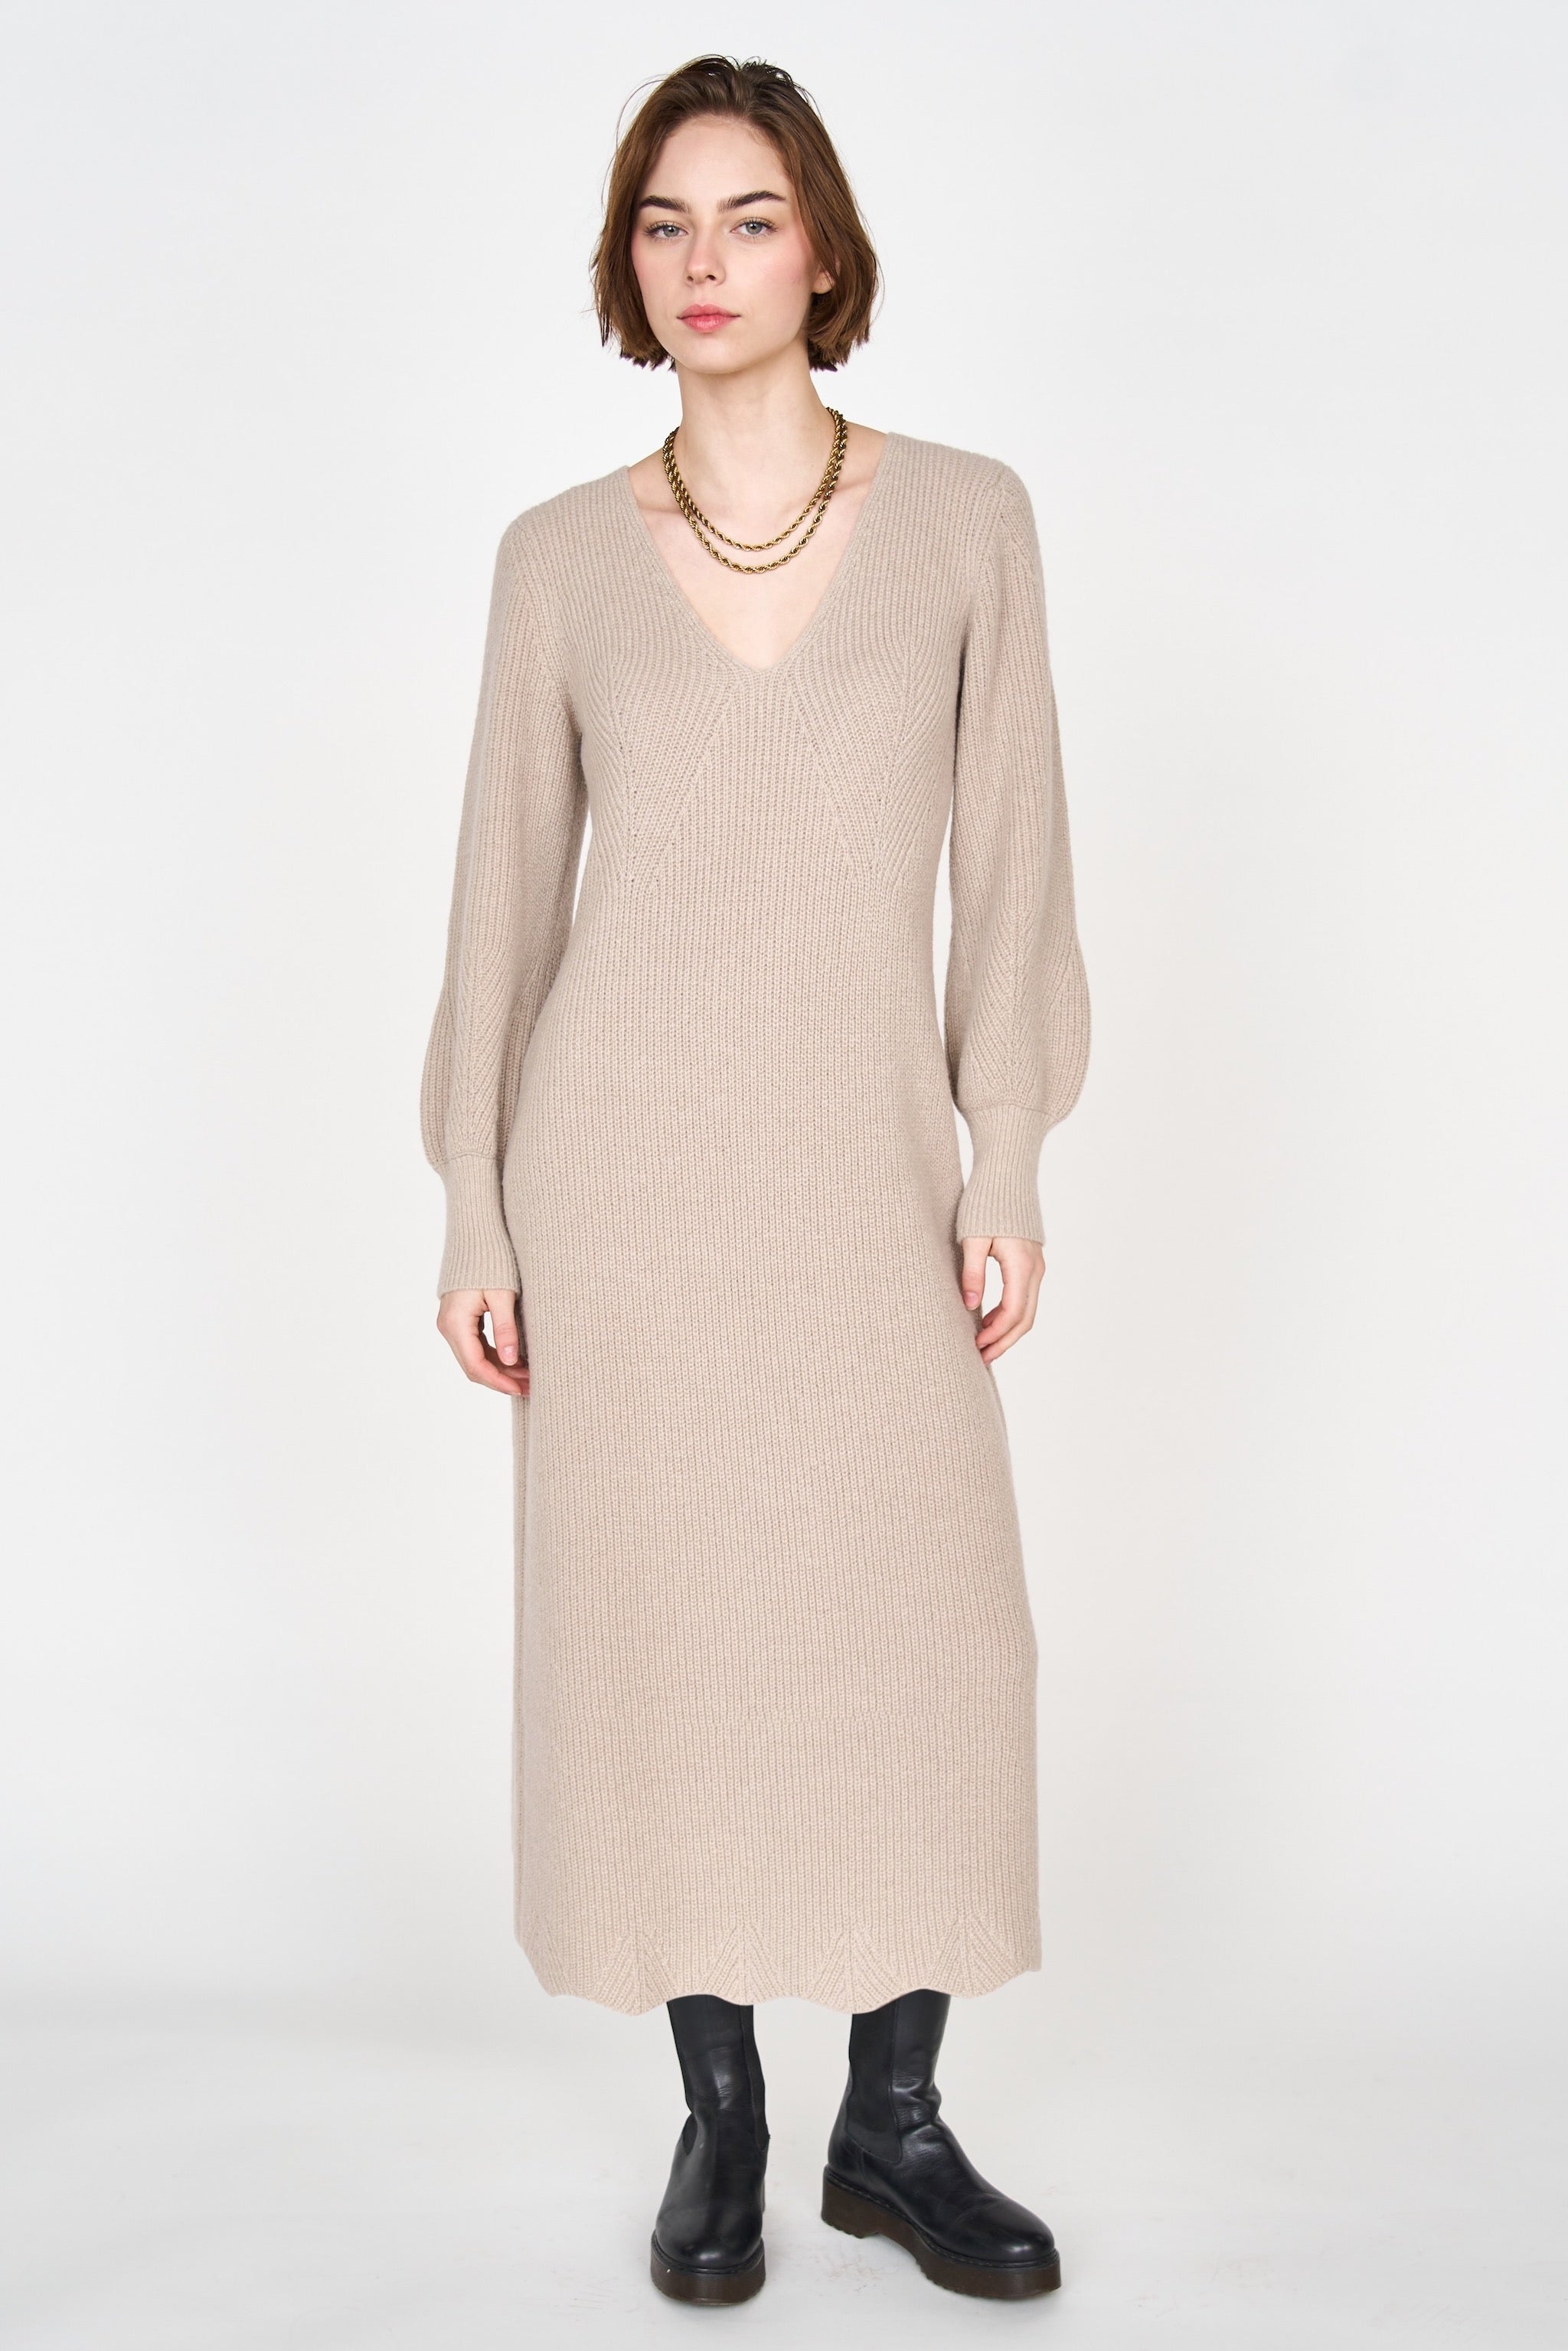 bellagio knit dress in taupe